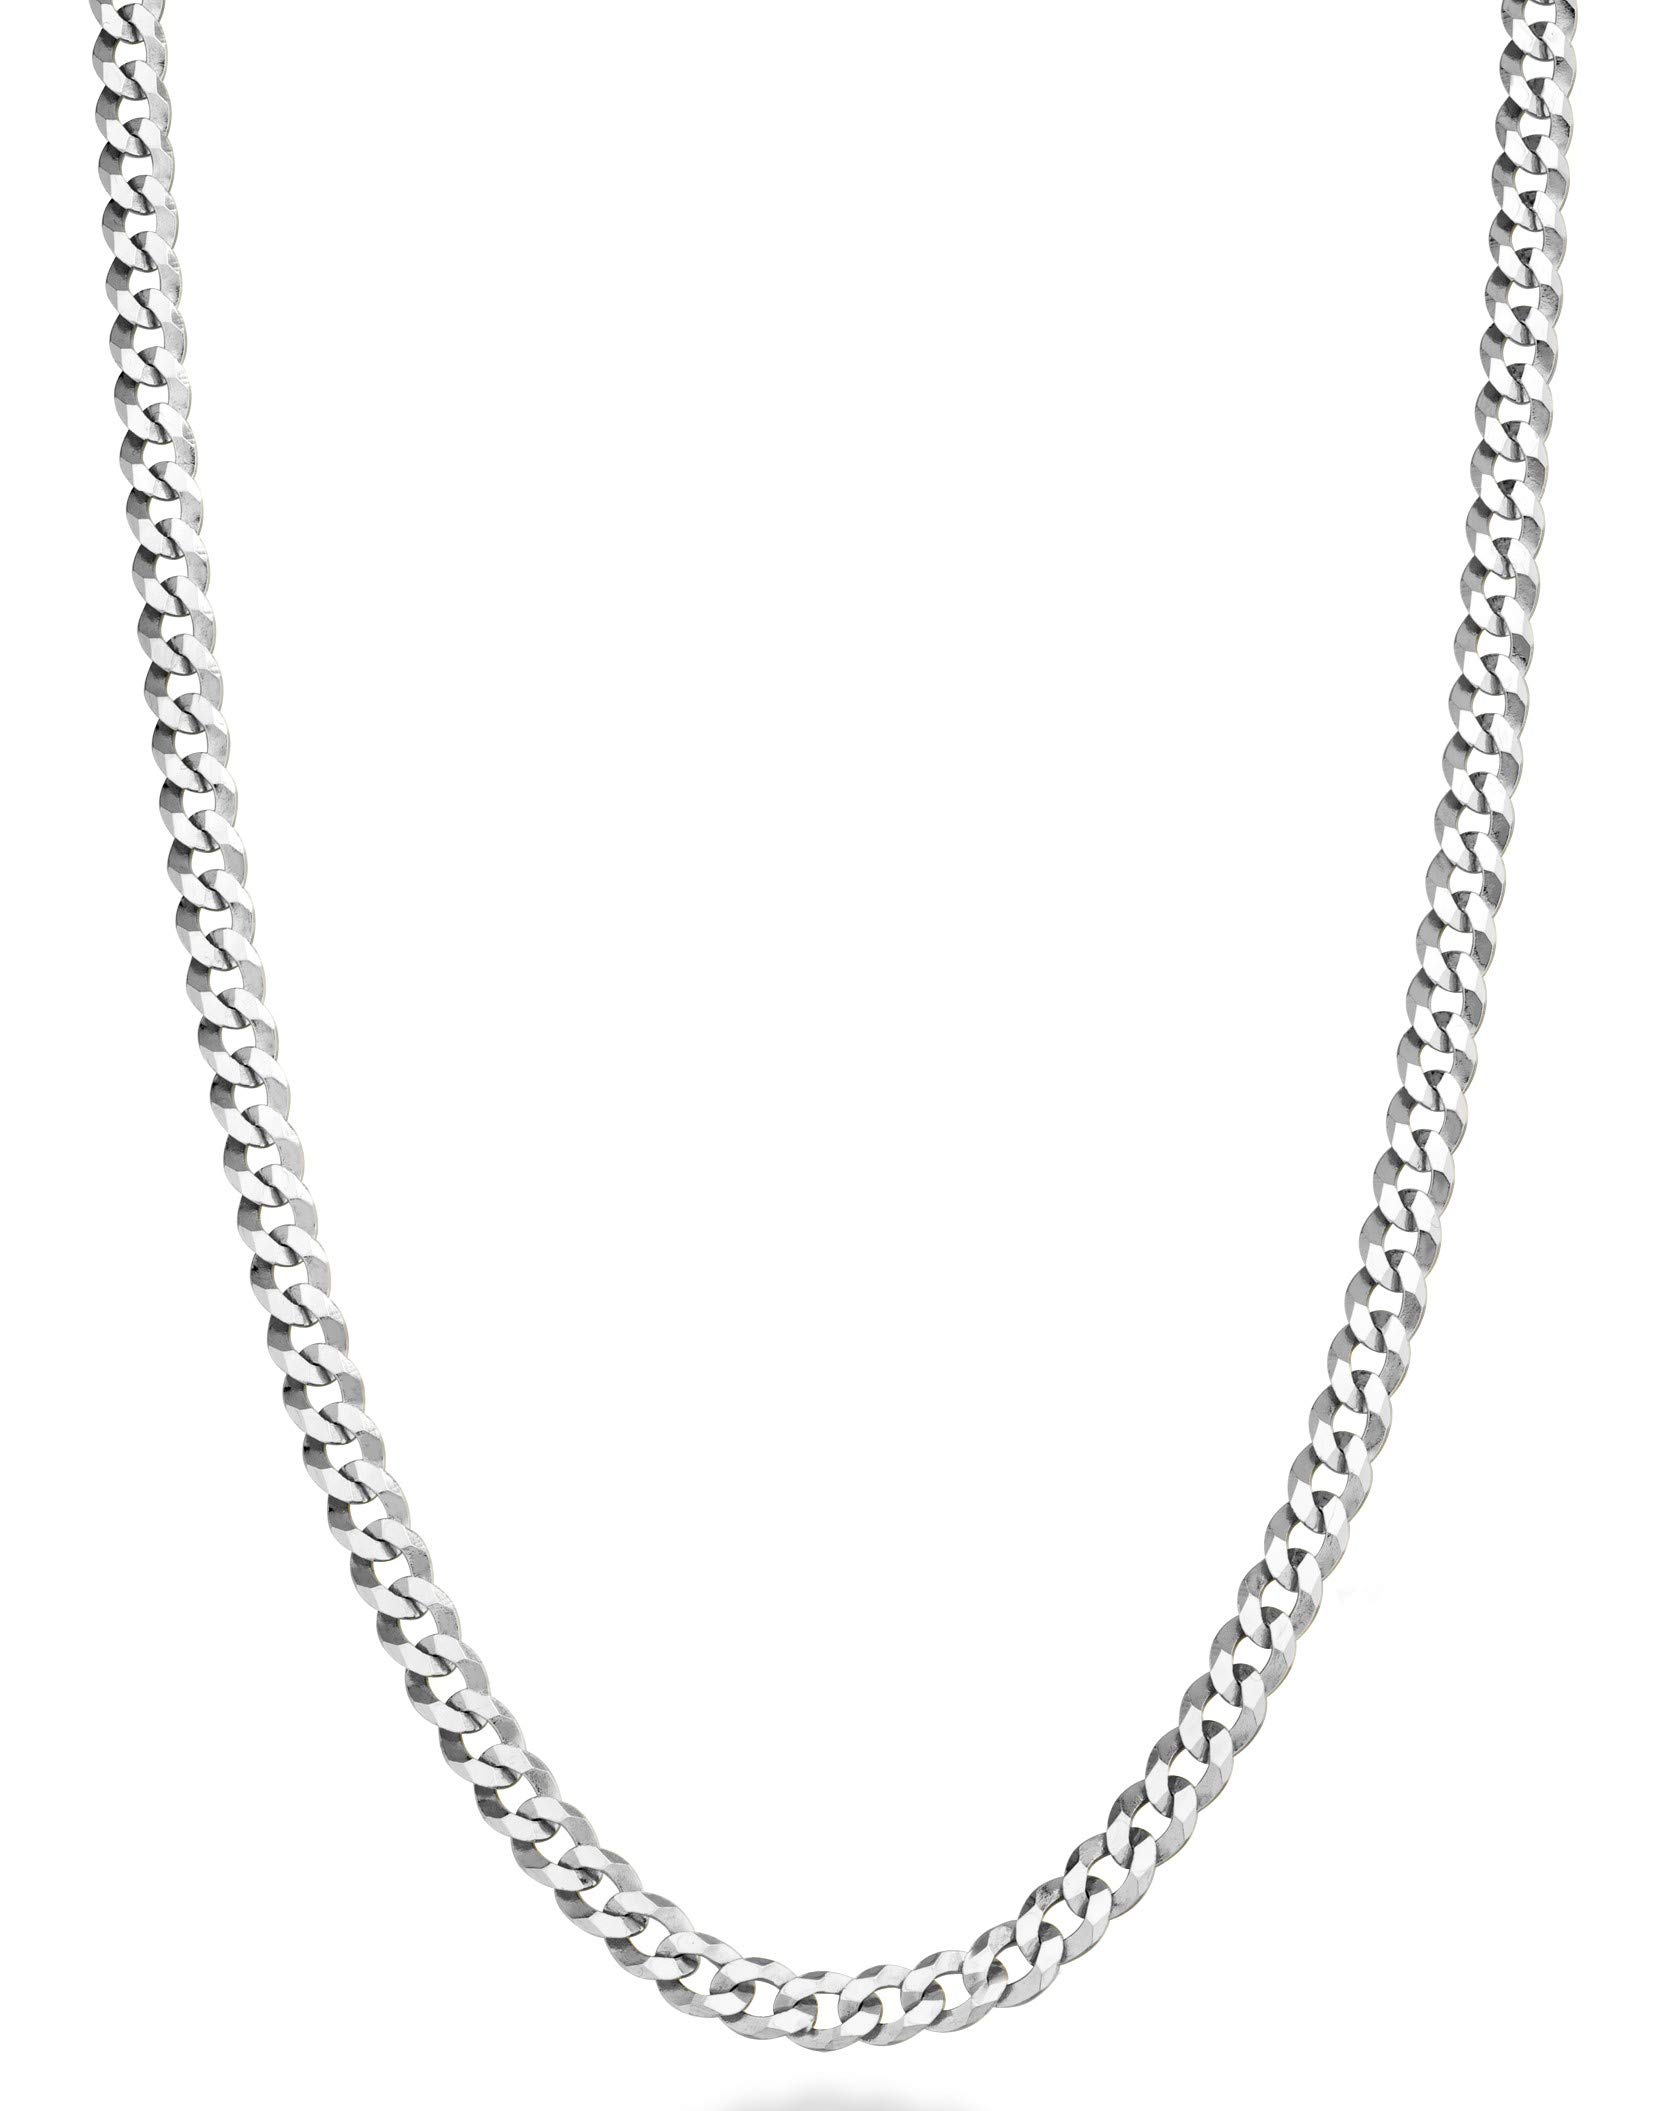 Miabella Italian 925 Sterling Silver 3.5mm Curb Cuban Link Chain Necklace, Solid Diamond Cut Sterling Silver Chain for Men Women Made in Italy